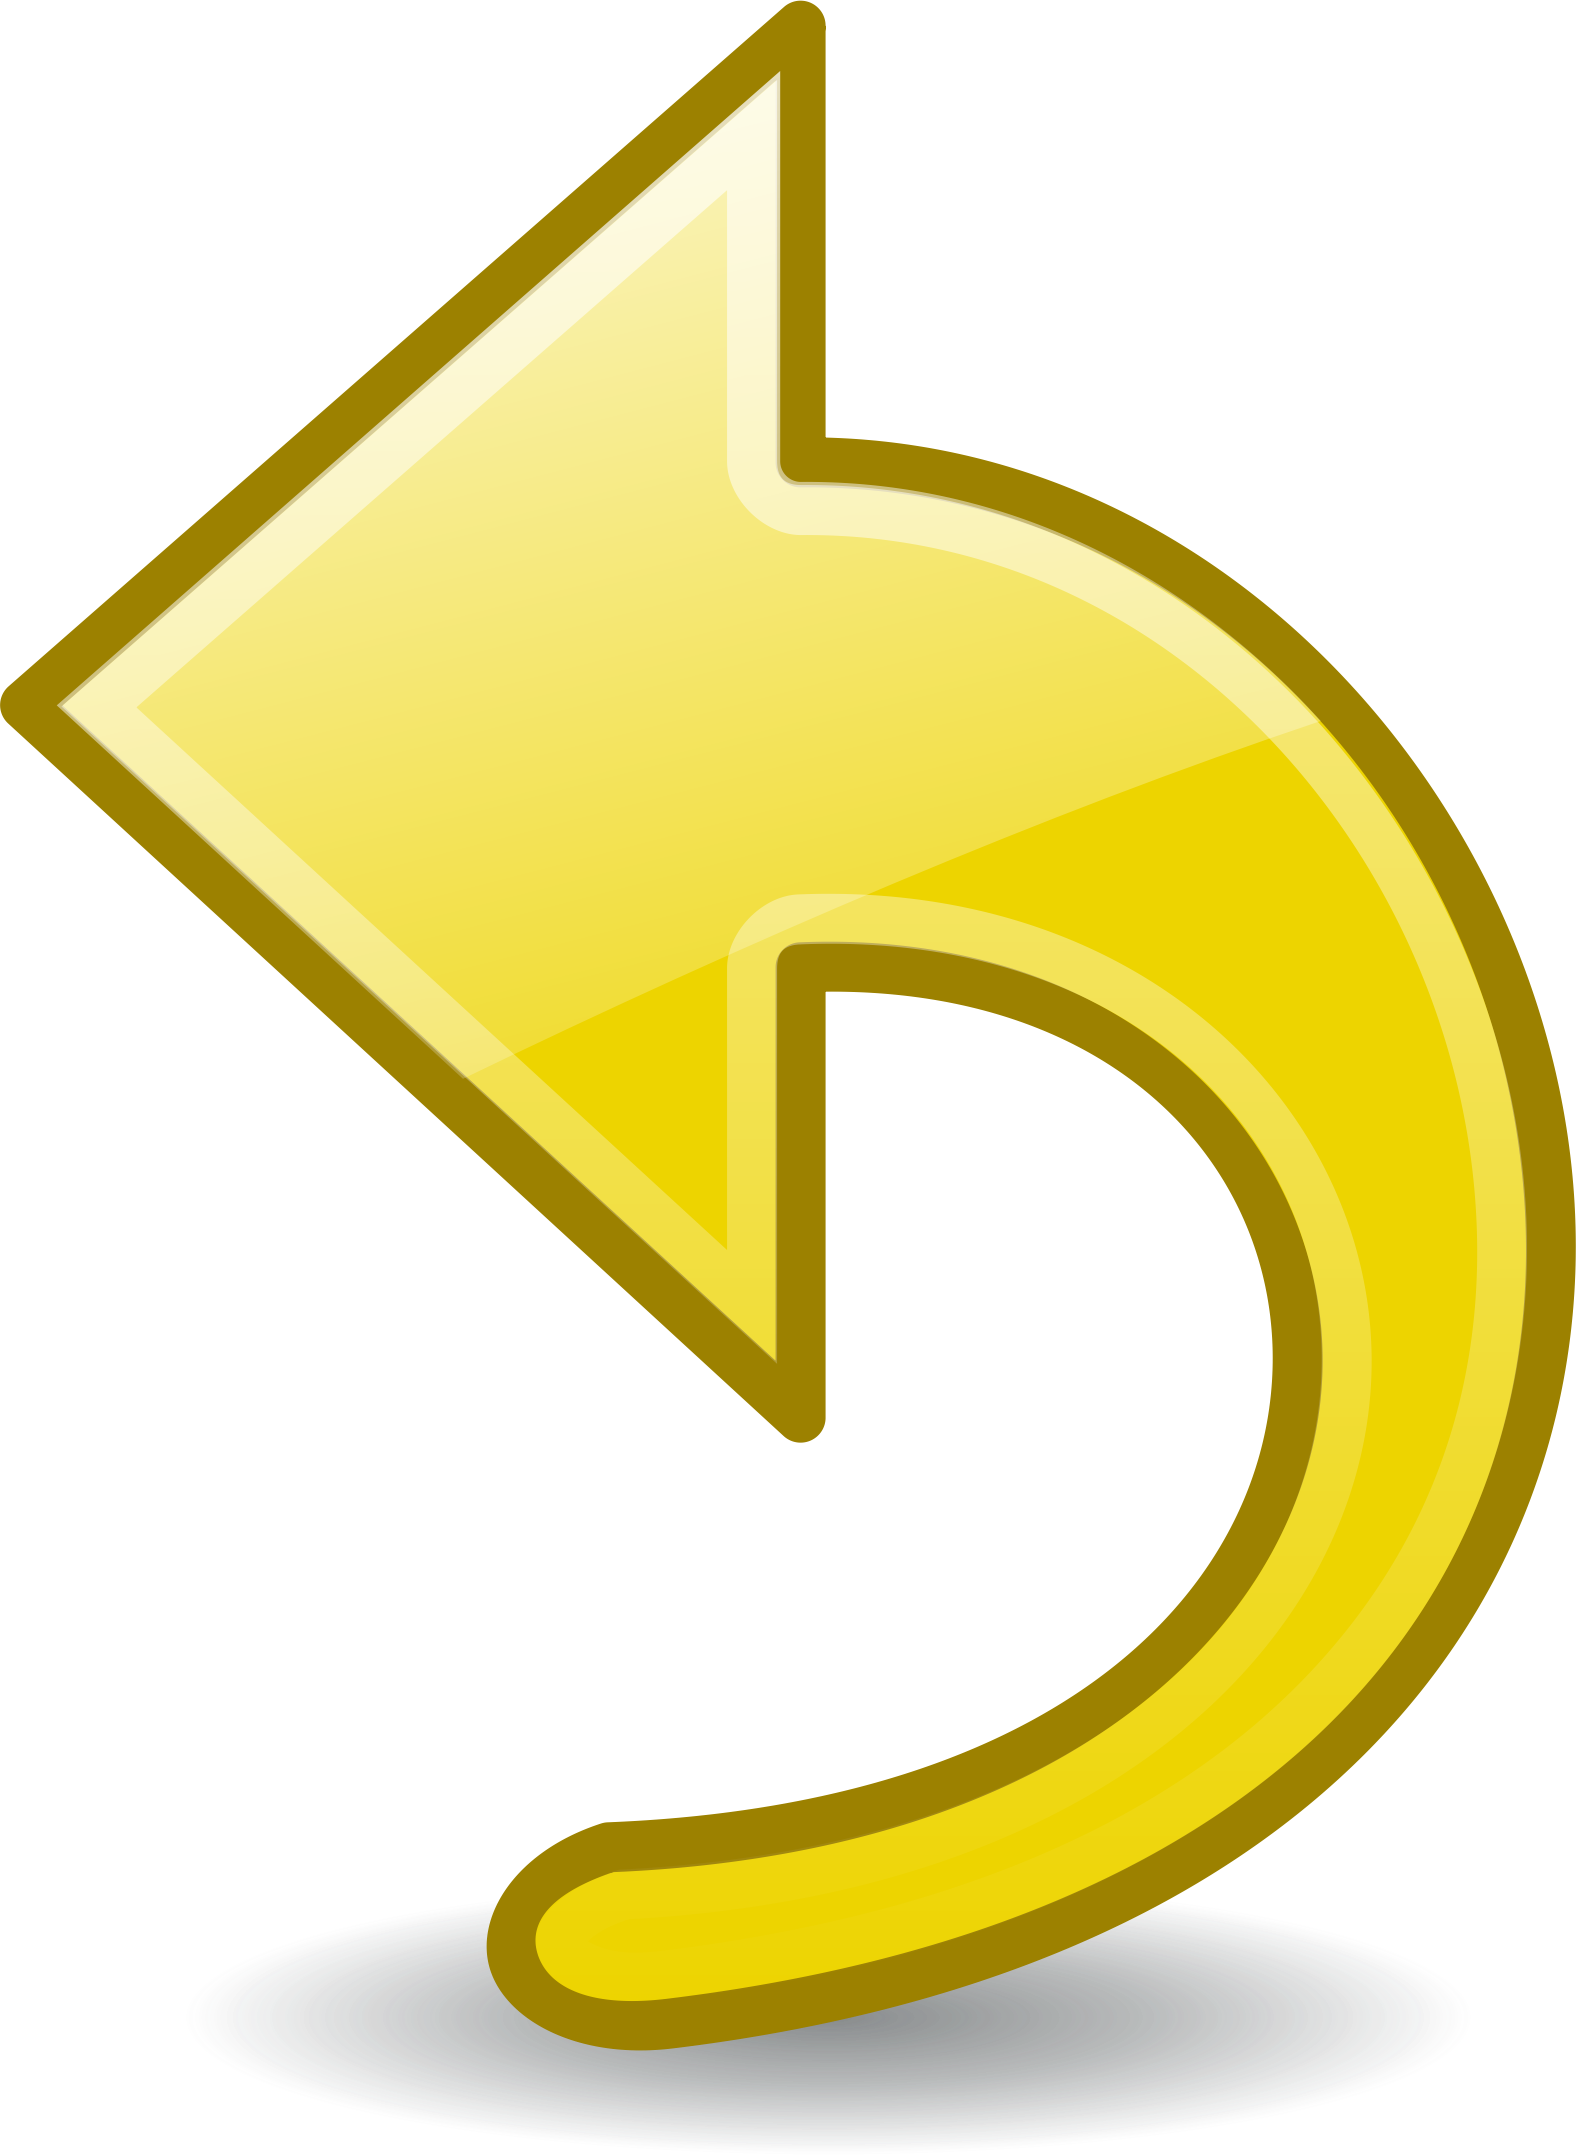 A Yellow Arrow Pointing To The Left